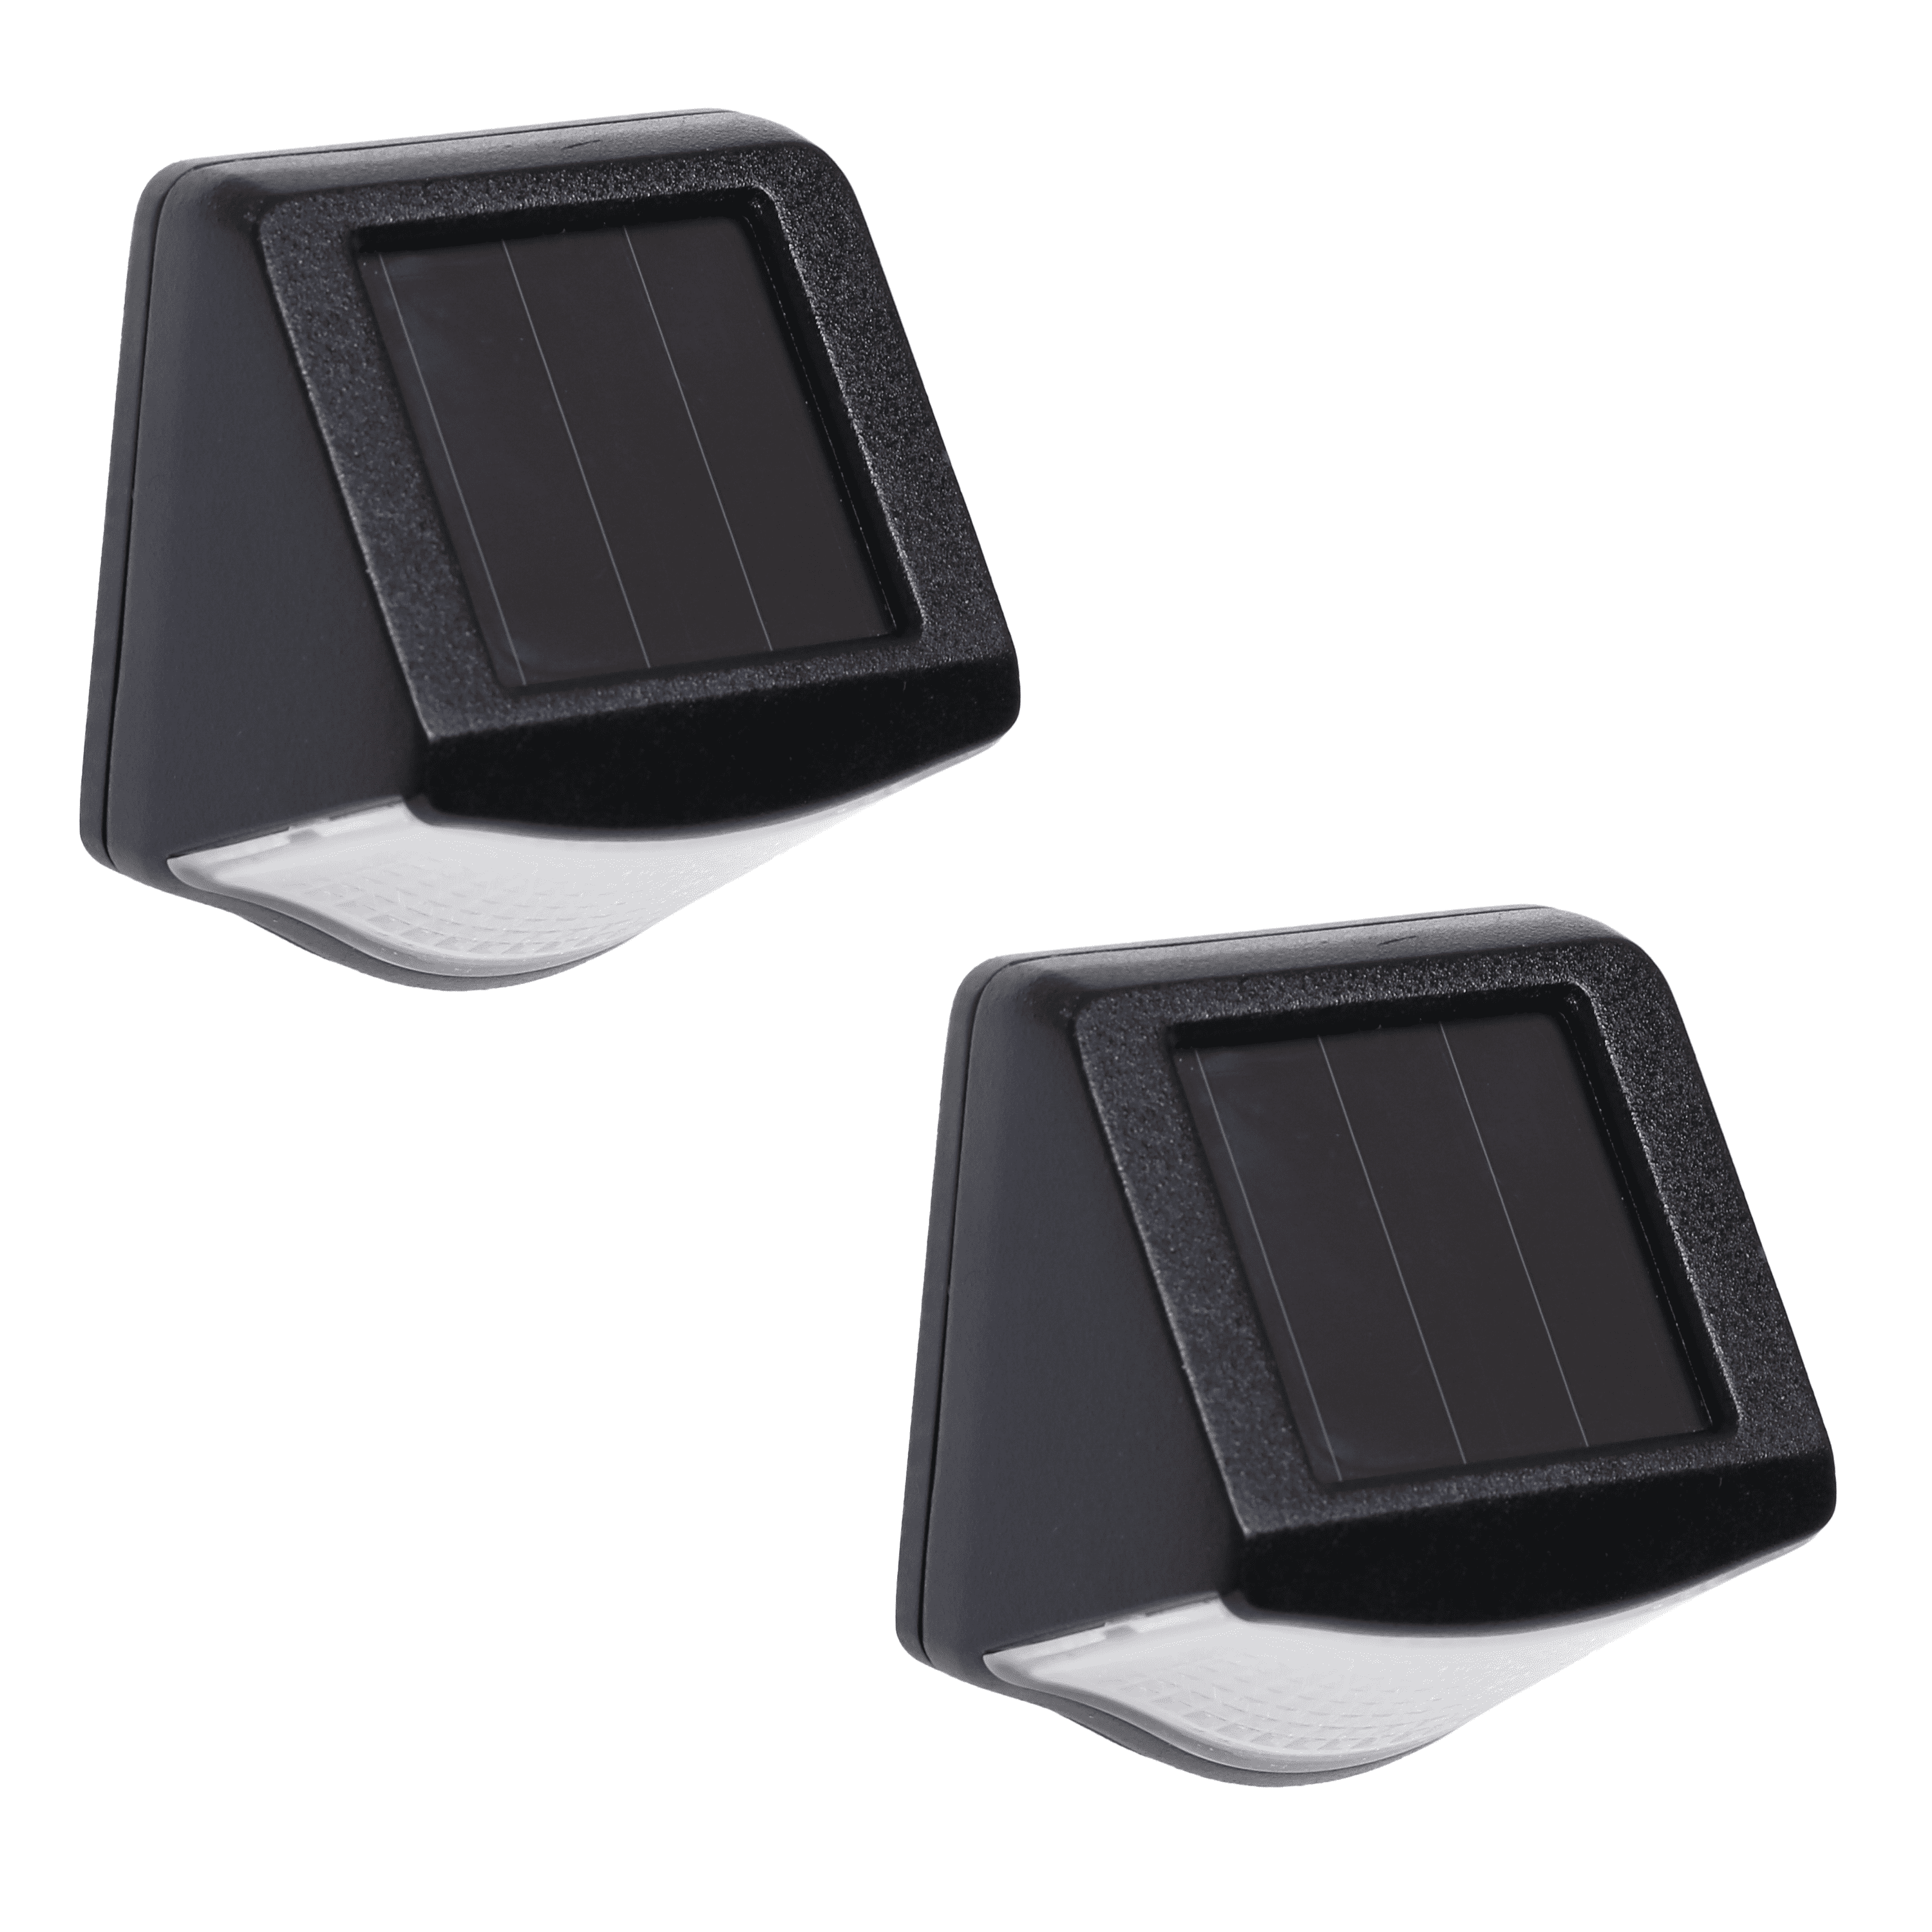 Mainstays 2-Count Solar Powered Black Wall Mountable LED Step Light, 3 Lumens for Patios, Decks, Outdoor Areas